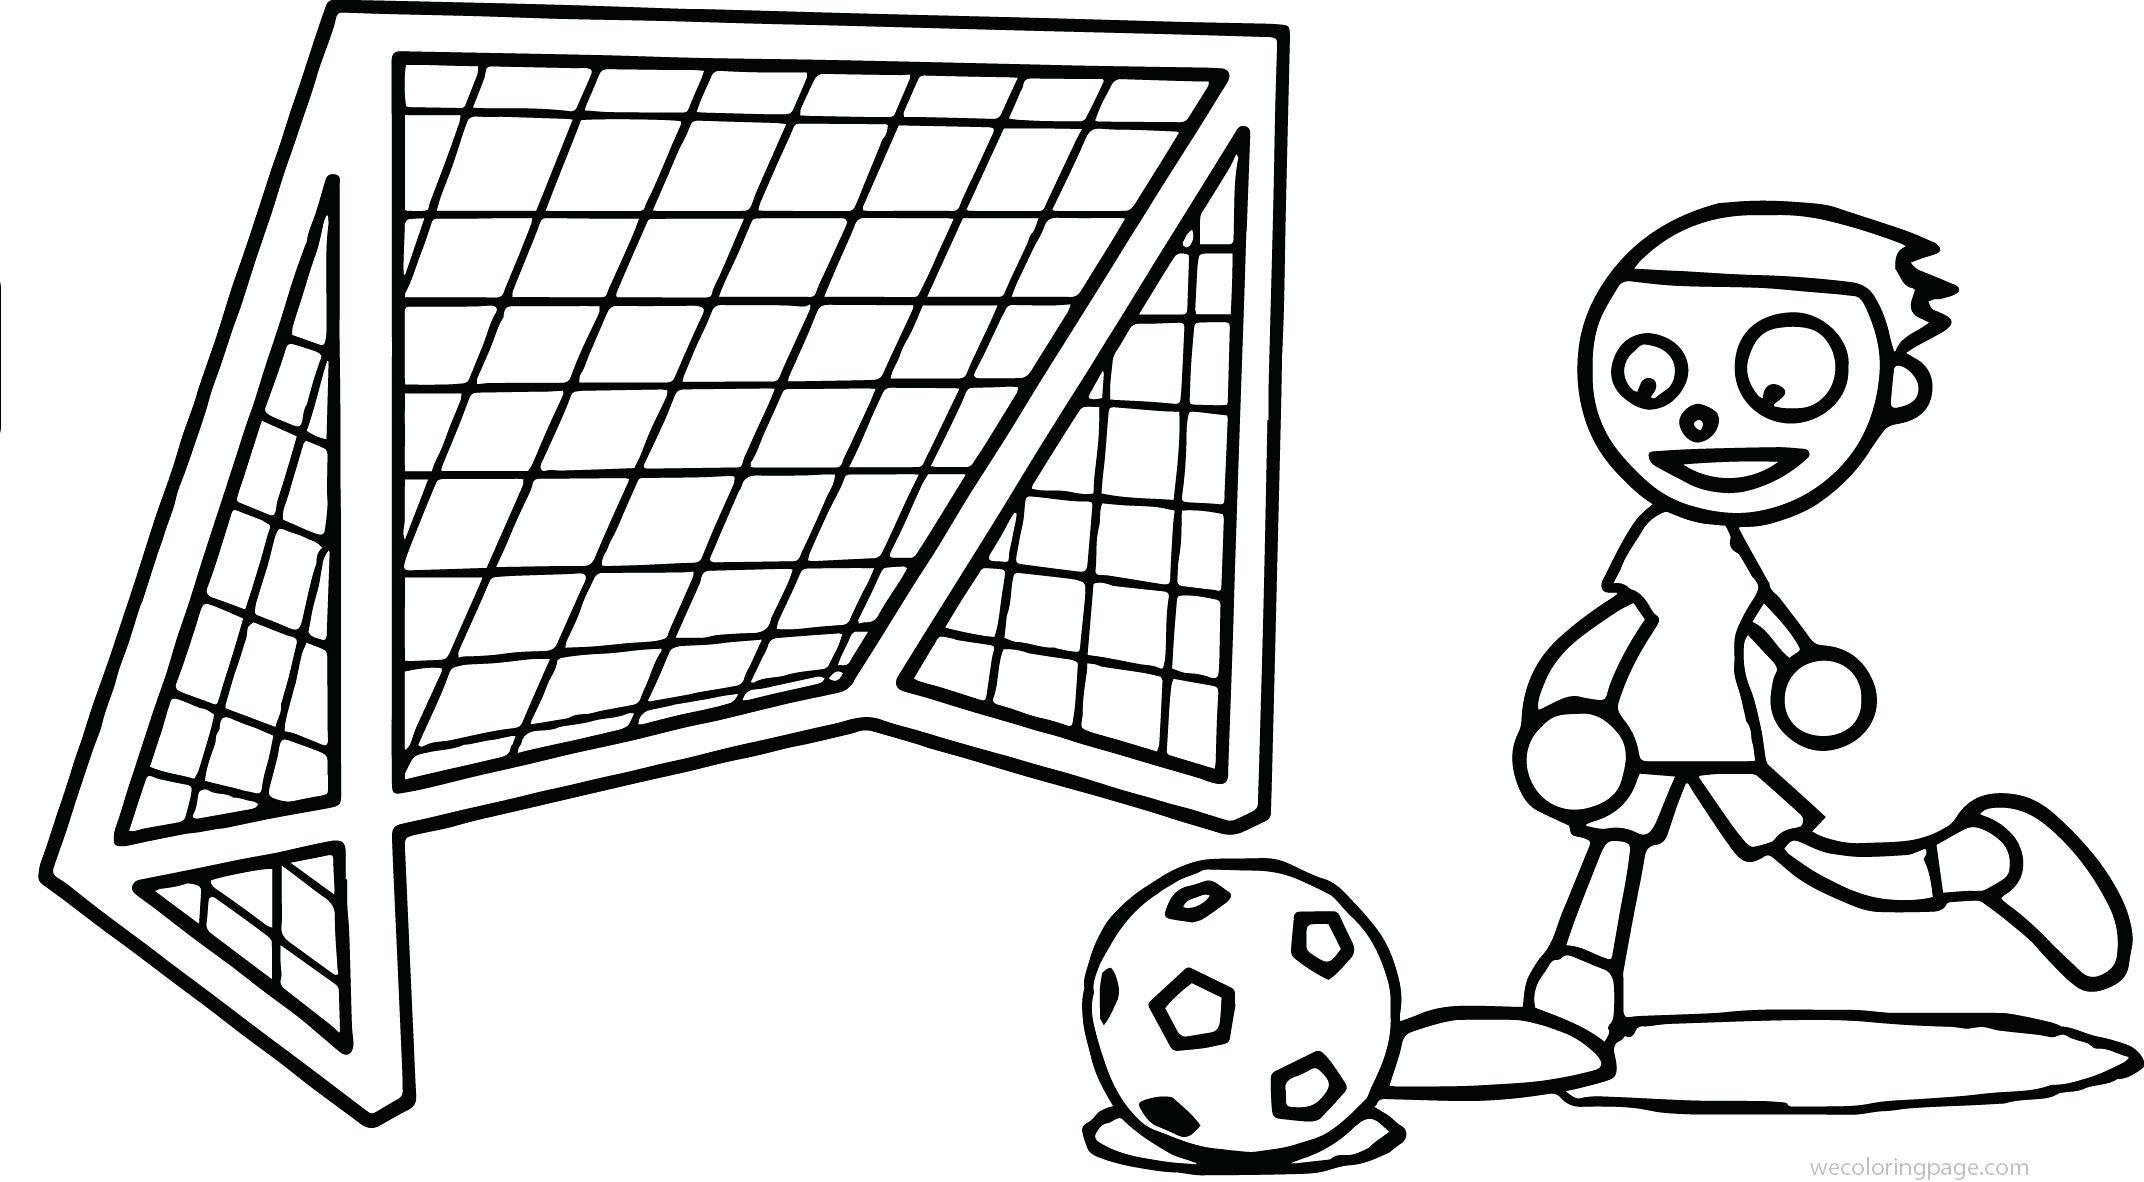 Amazing How To Draw Soccer Net in the world Don t miss out 